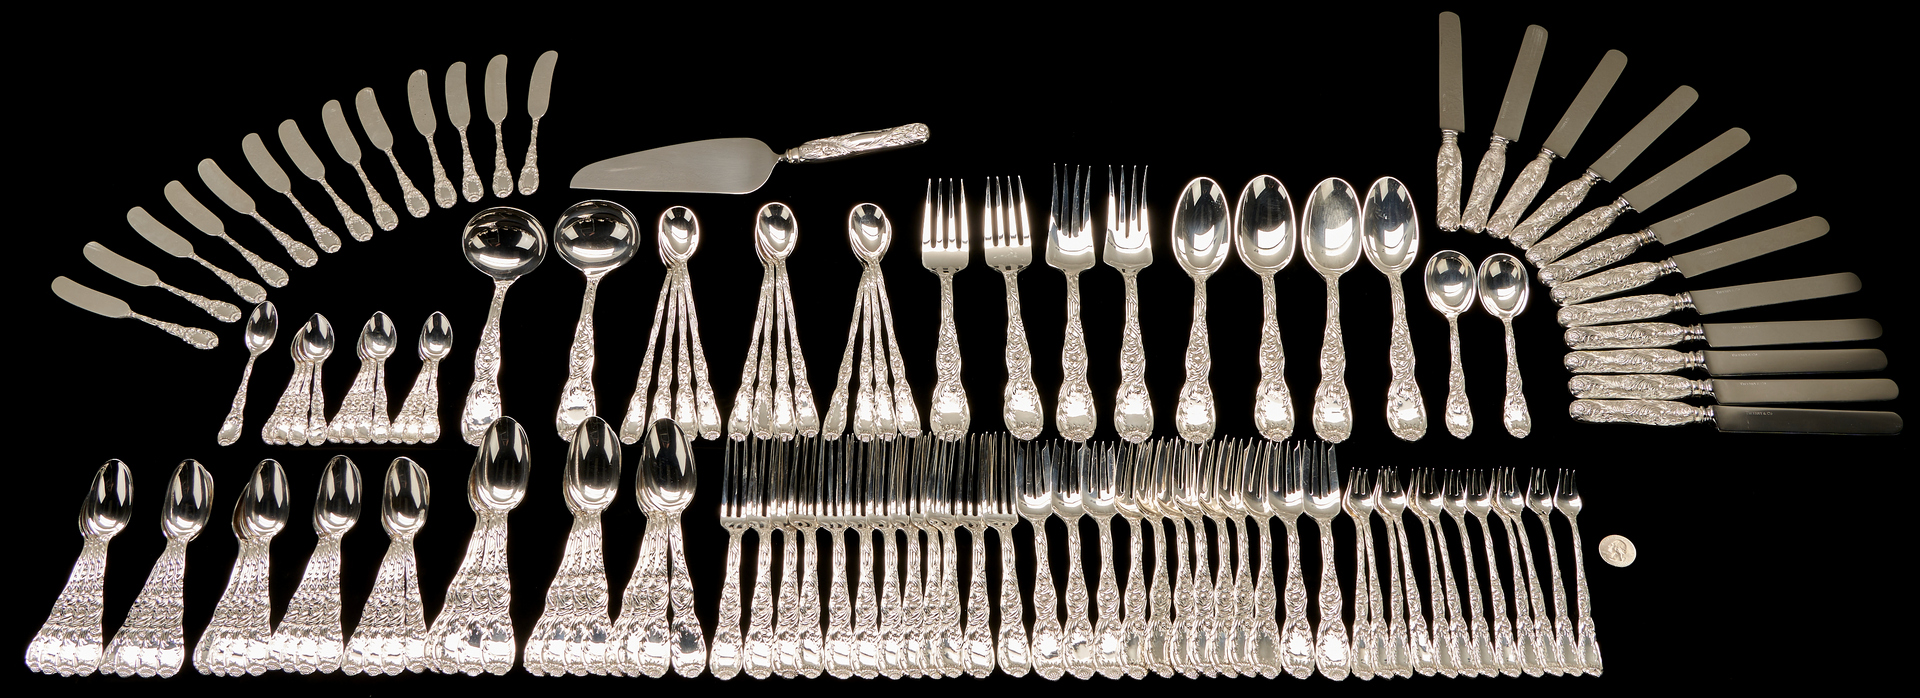 Lot 65: 130 pcs. Tiffany & Co Chrysanthemum Sterling Flatware, Svc for 12, most Moore